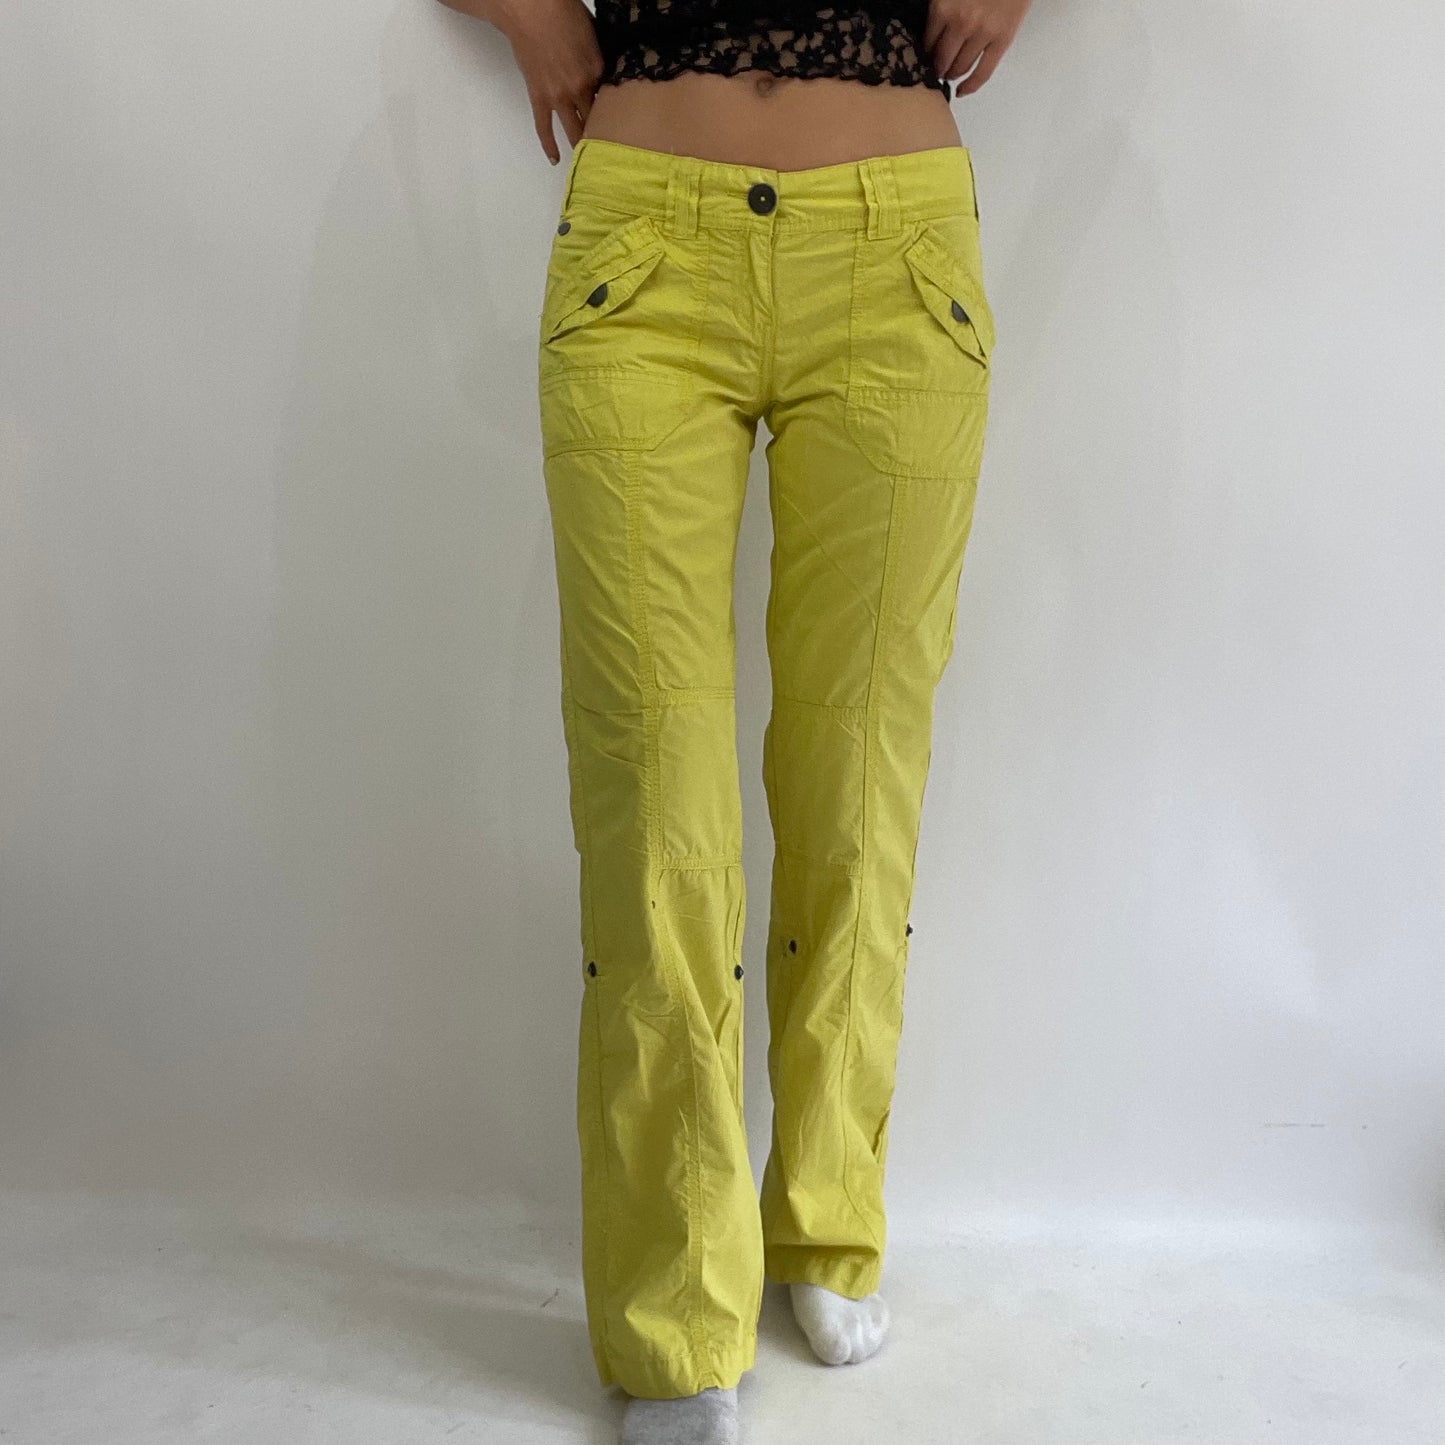 HAILEY BIEBER DROP | small yellow cargo trousers